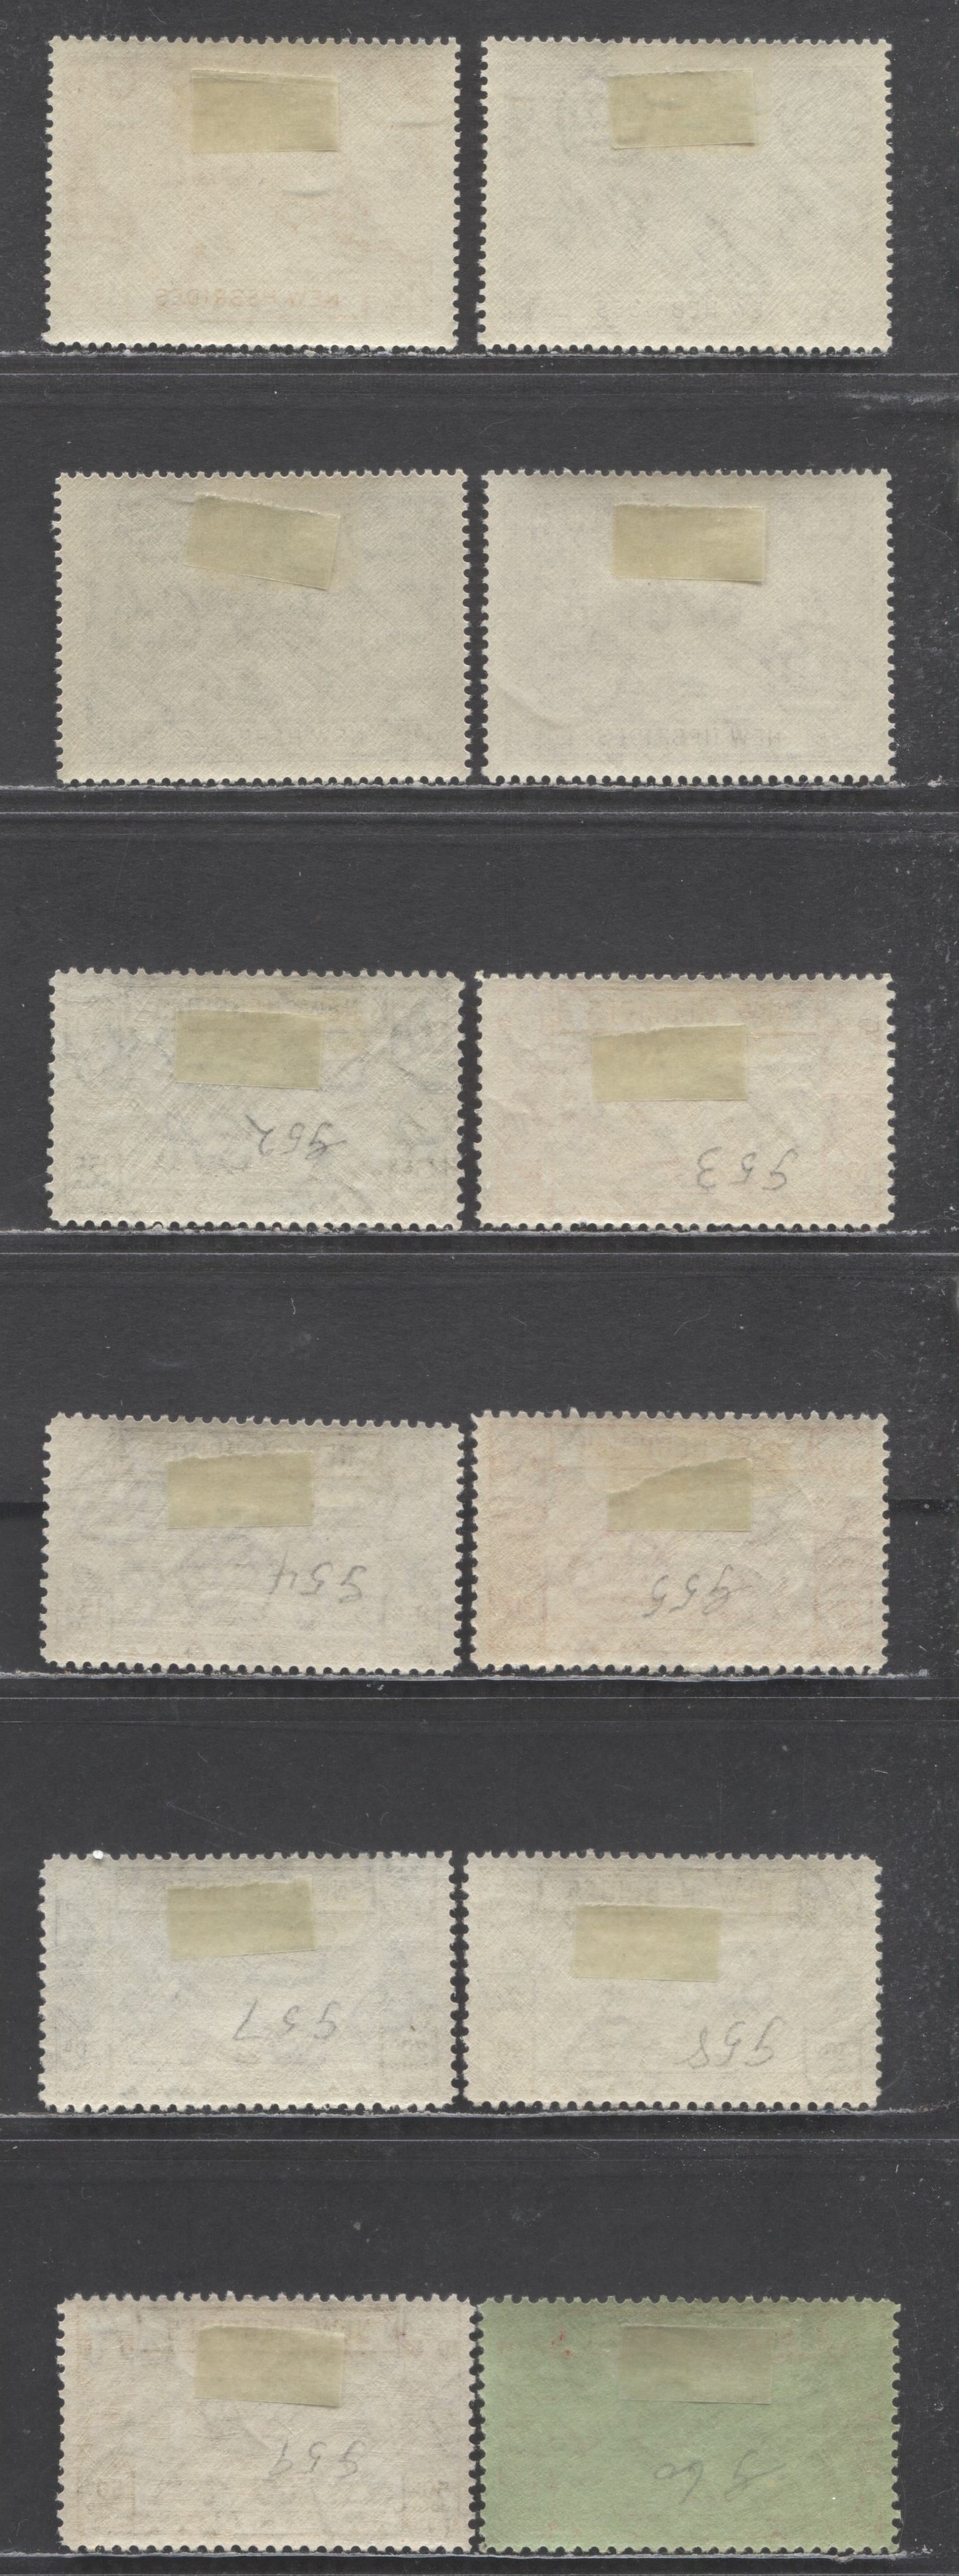 Lot 98 New Hebrides SC#50/65 1938-1949 Beach Scene Definitives & UPU Issues, 12 VFOG Singles, Click on Listing to See ALL Pictures, 2022 Scott Classic Cat. $26.1